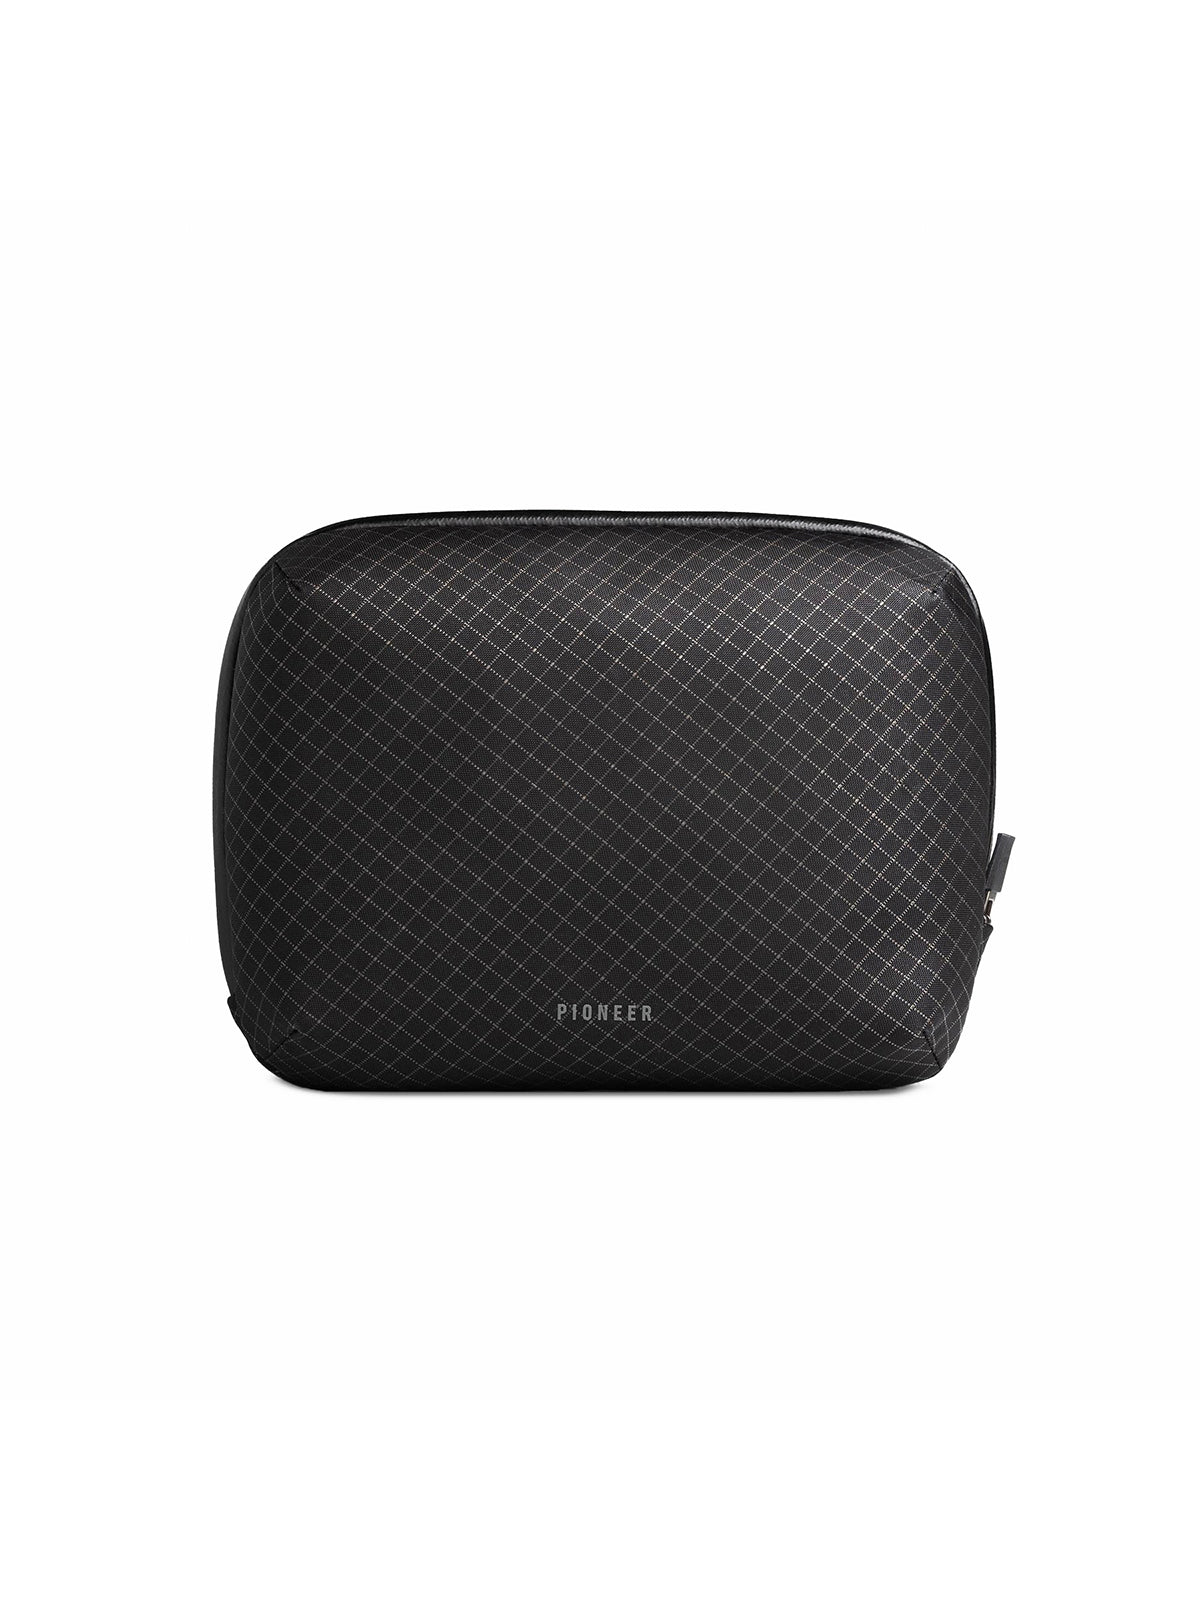 Pioneer Global Pouch Onyx